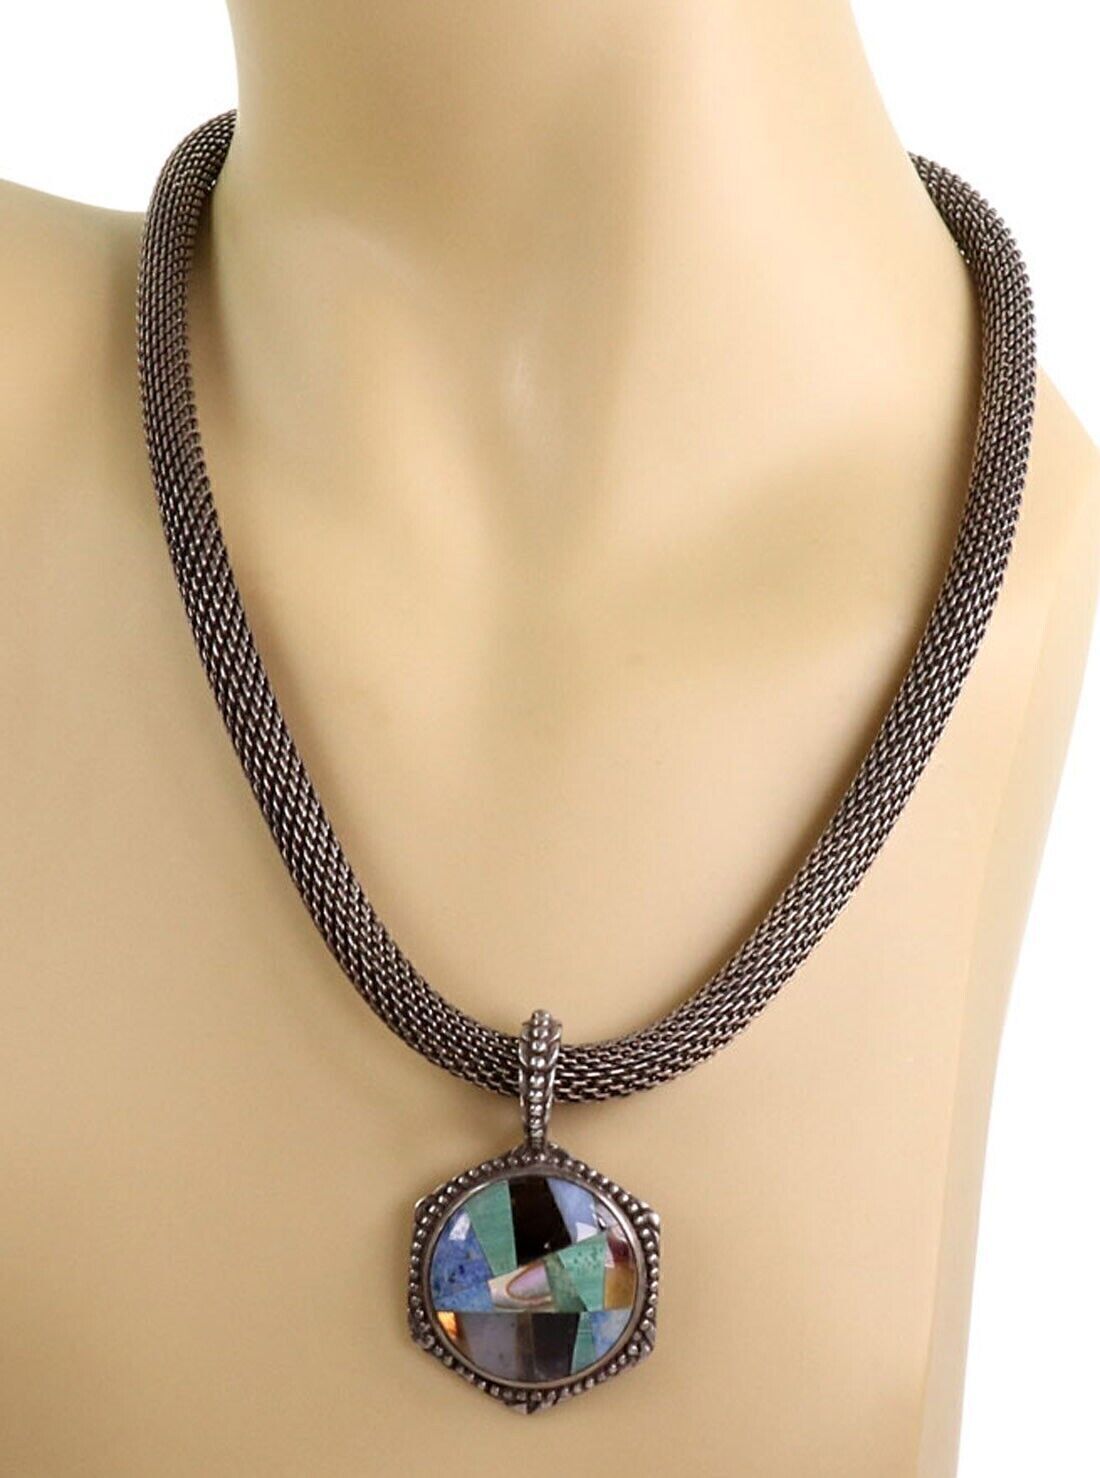 Stephen Dweck Multicolor Gems Inlaid Sterling Silver Pendant & Mesh Necklace | Necklaces | catalog, Designer Jewelry, Necklaces, Pendants, stephen Dweck | Stephen Dweck